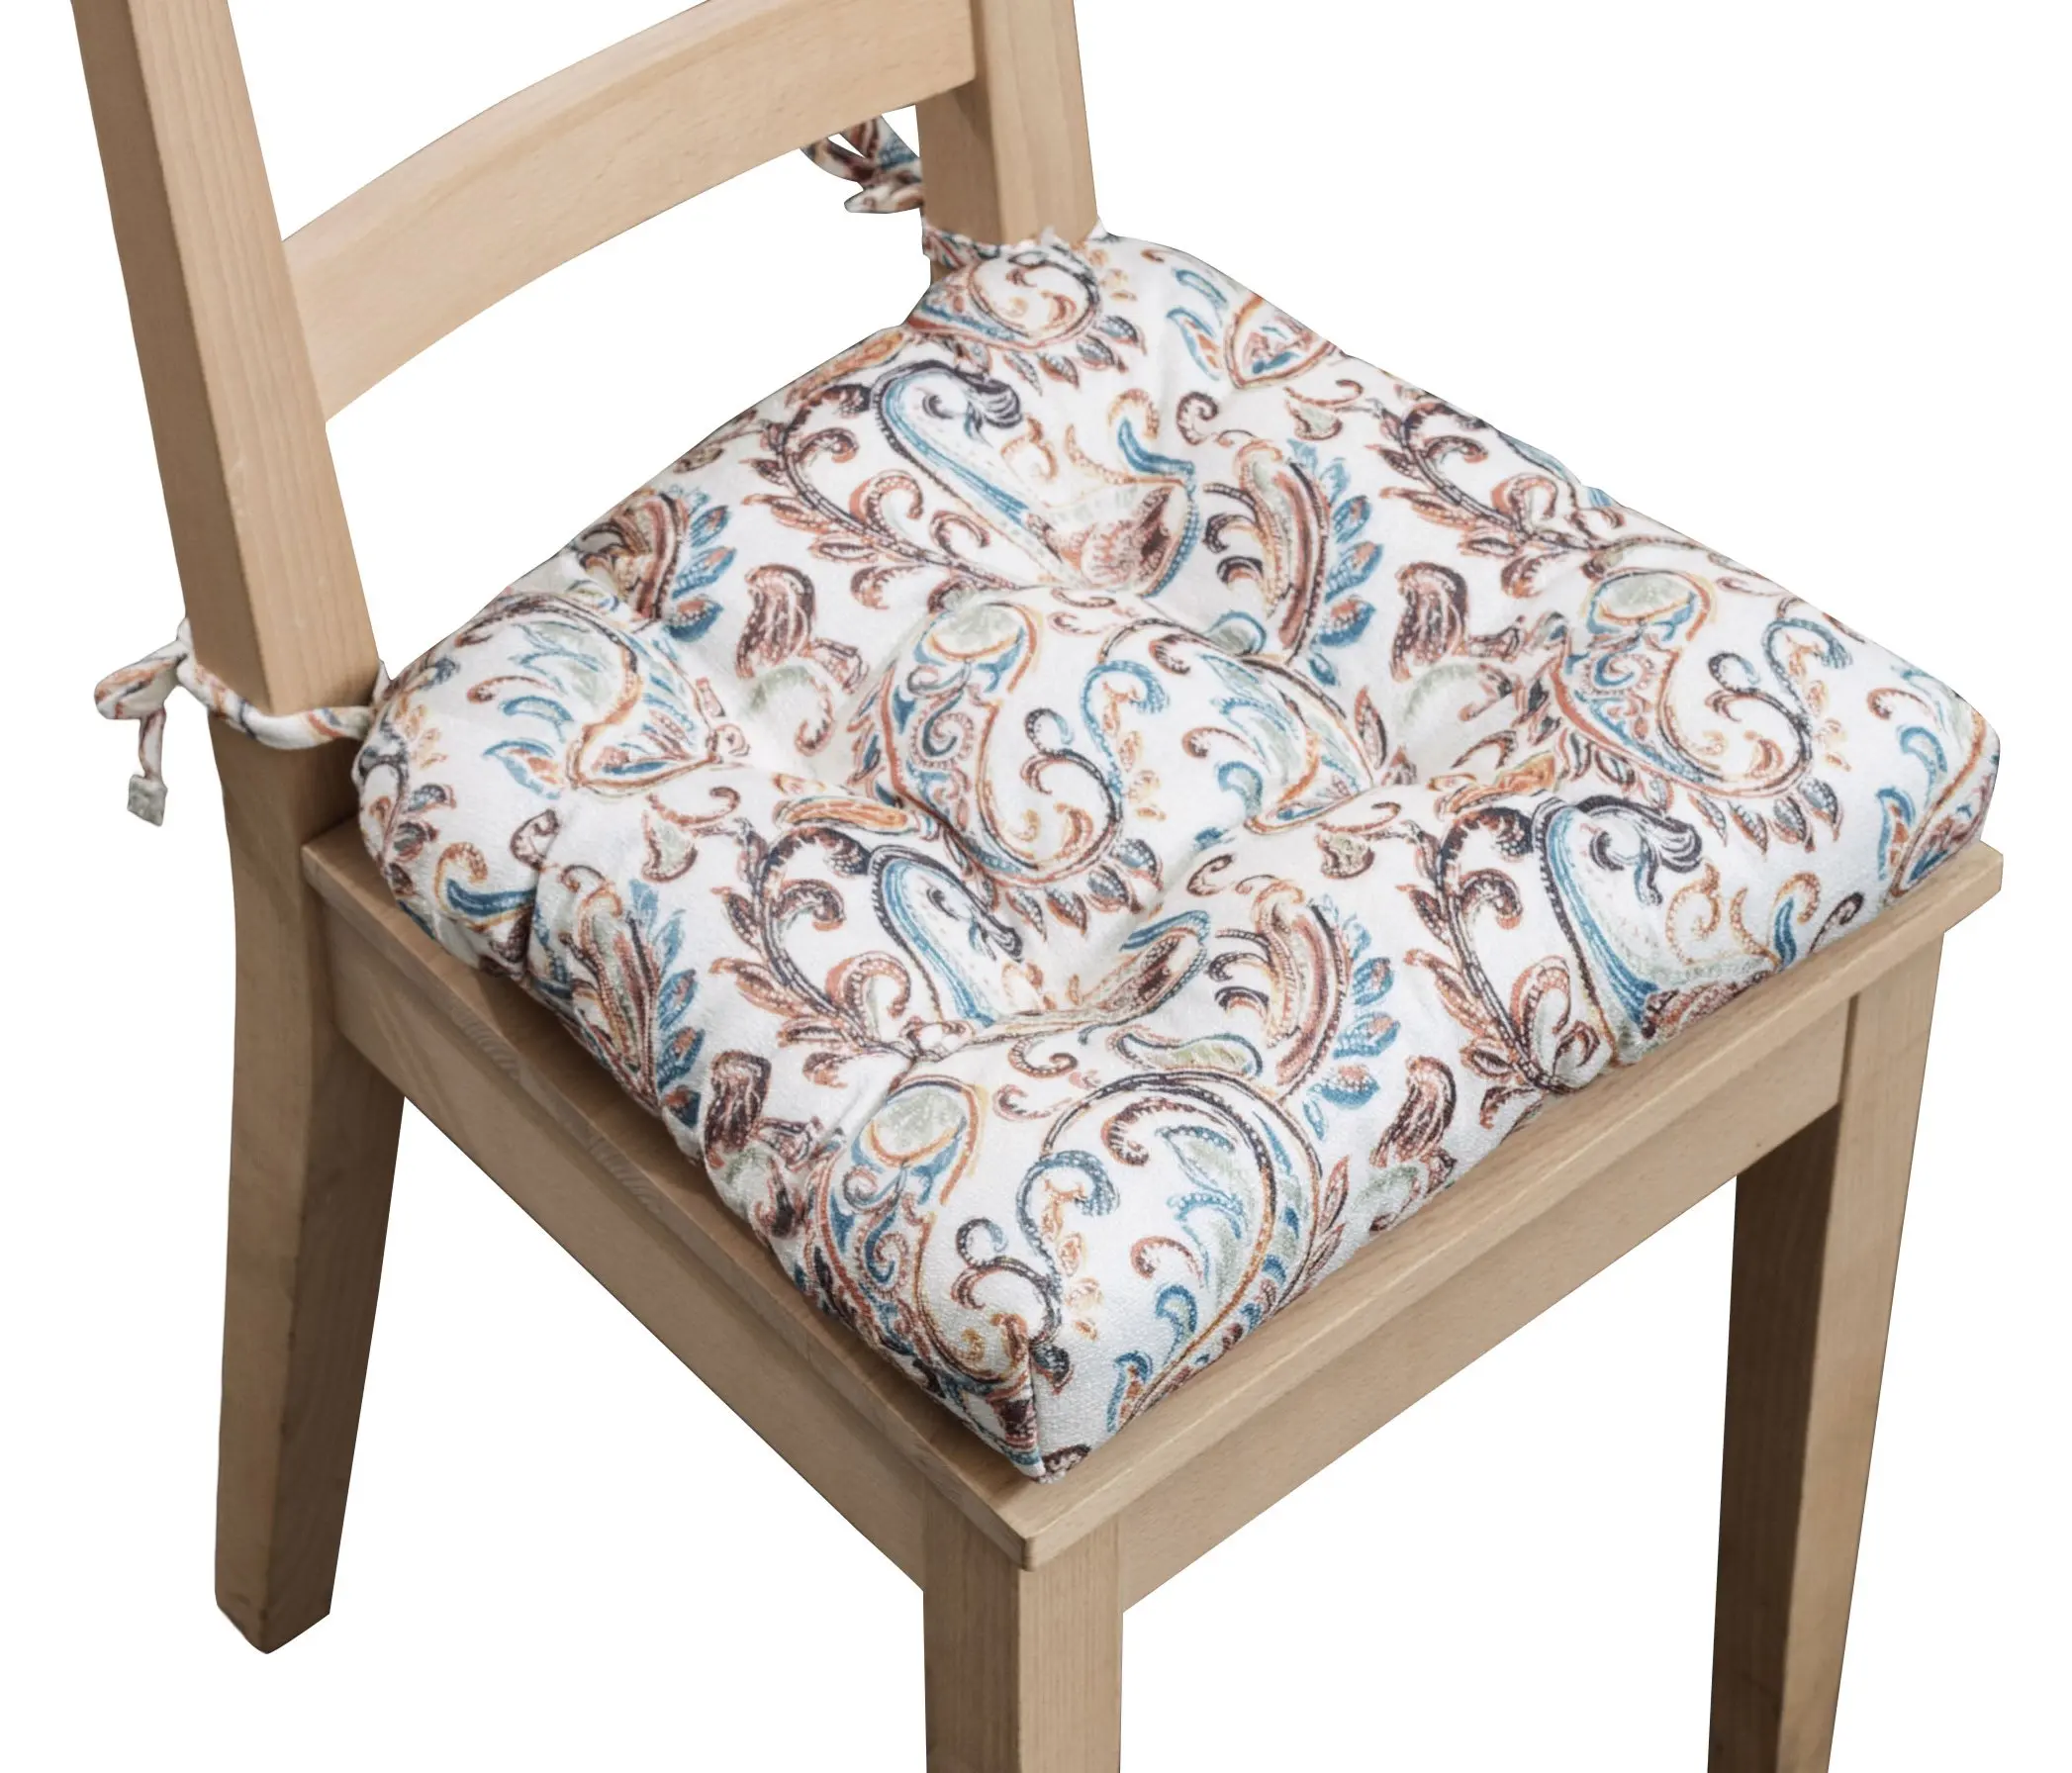 Indoor Dining Room Chair Cushions With Ties : Indoor Chair Cushions